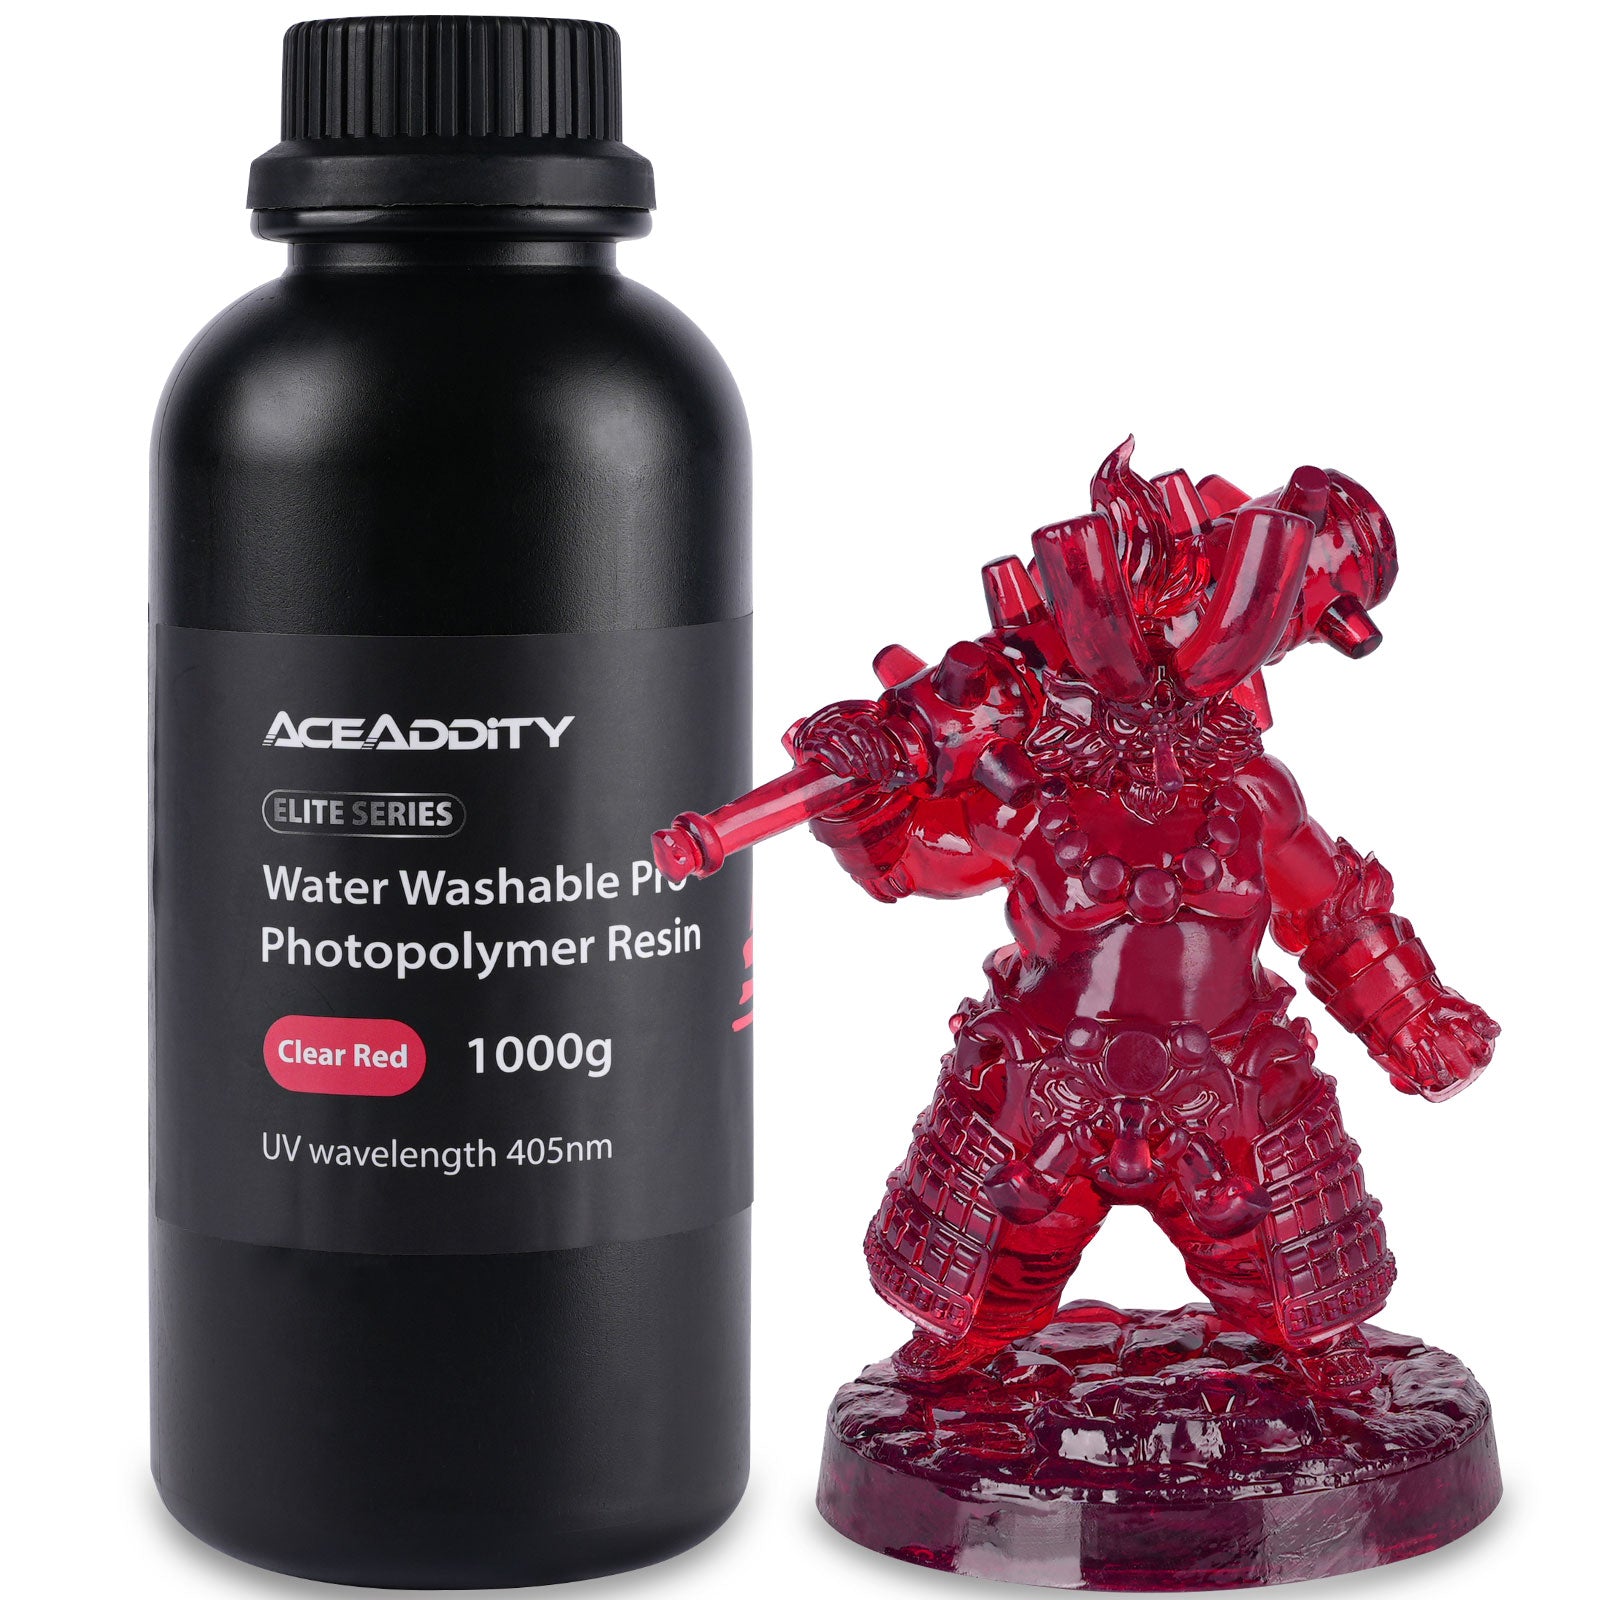 Aceaddity Water-Washable PRO 3D Printing Resin